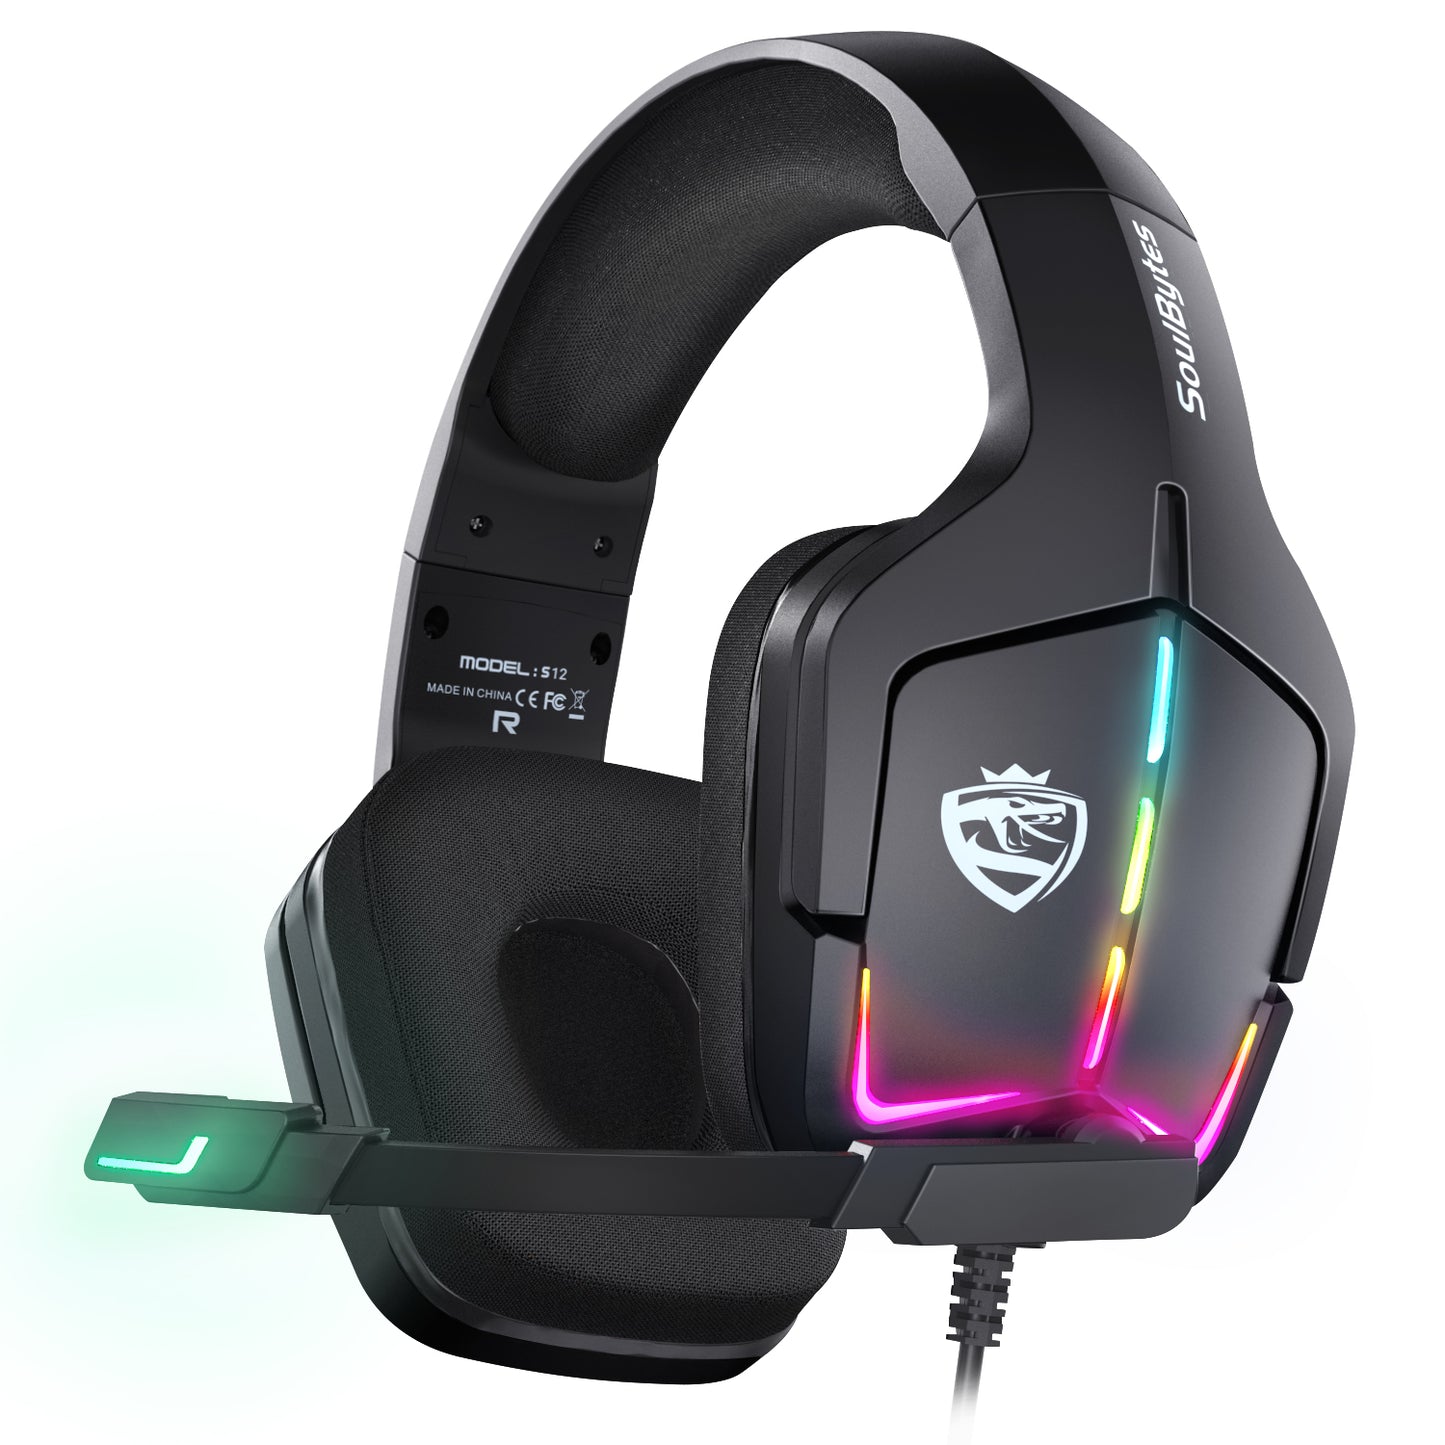 RGB LED Light Display Wintory Soulbytes S12 Gaming Headset Wintory